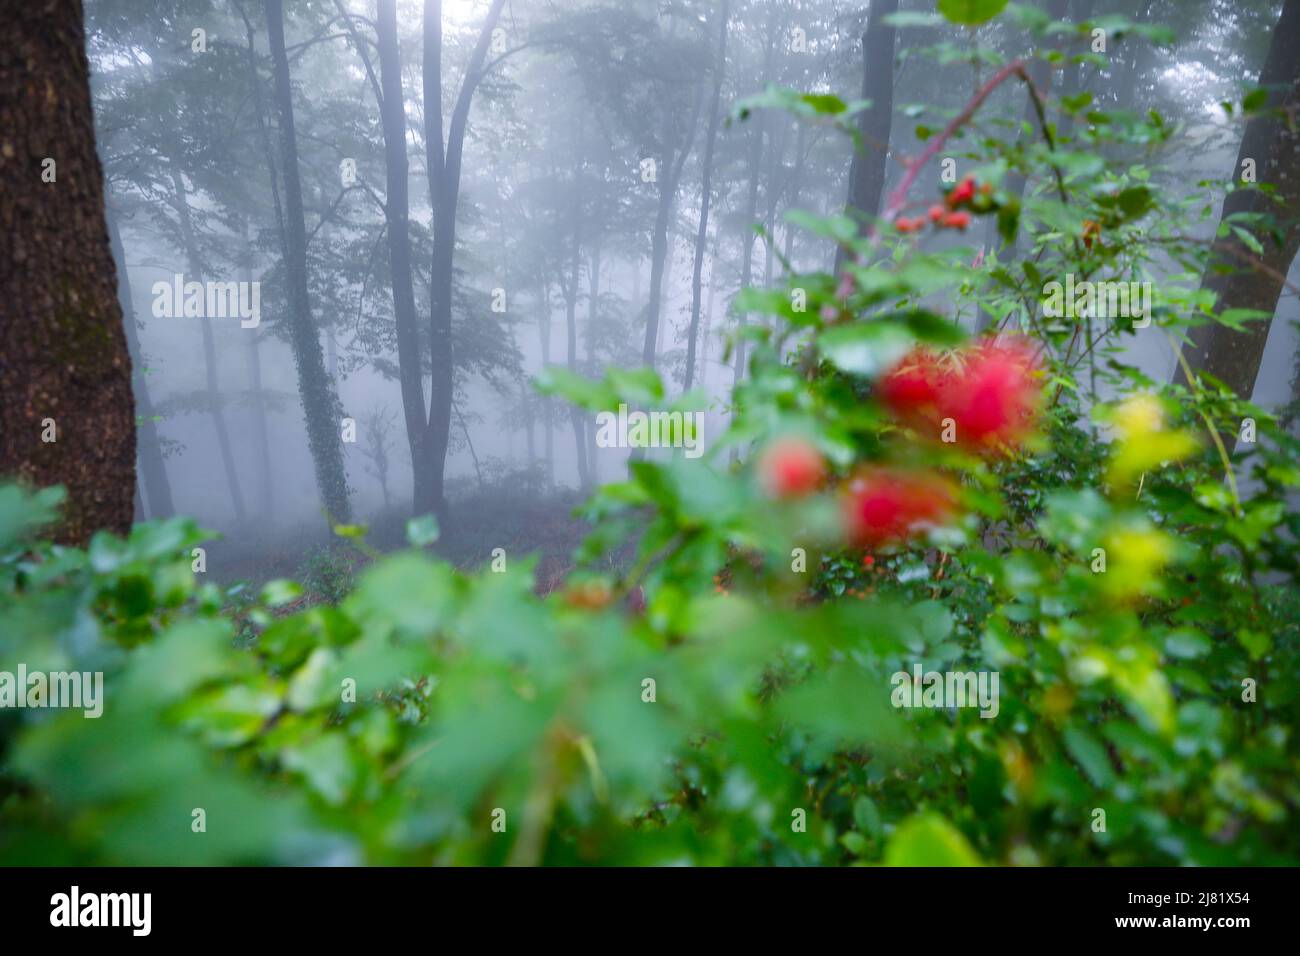 Misty (foggy) forest with blurred berries in the foreground Stock Photo